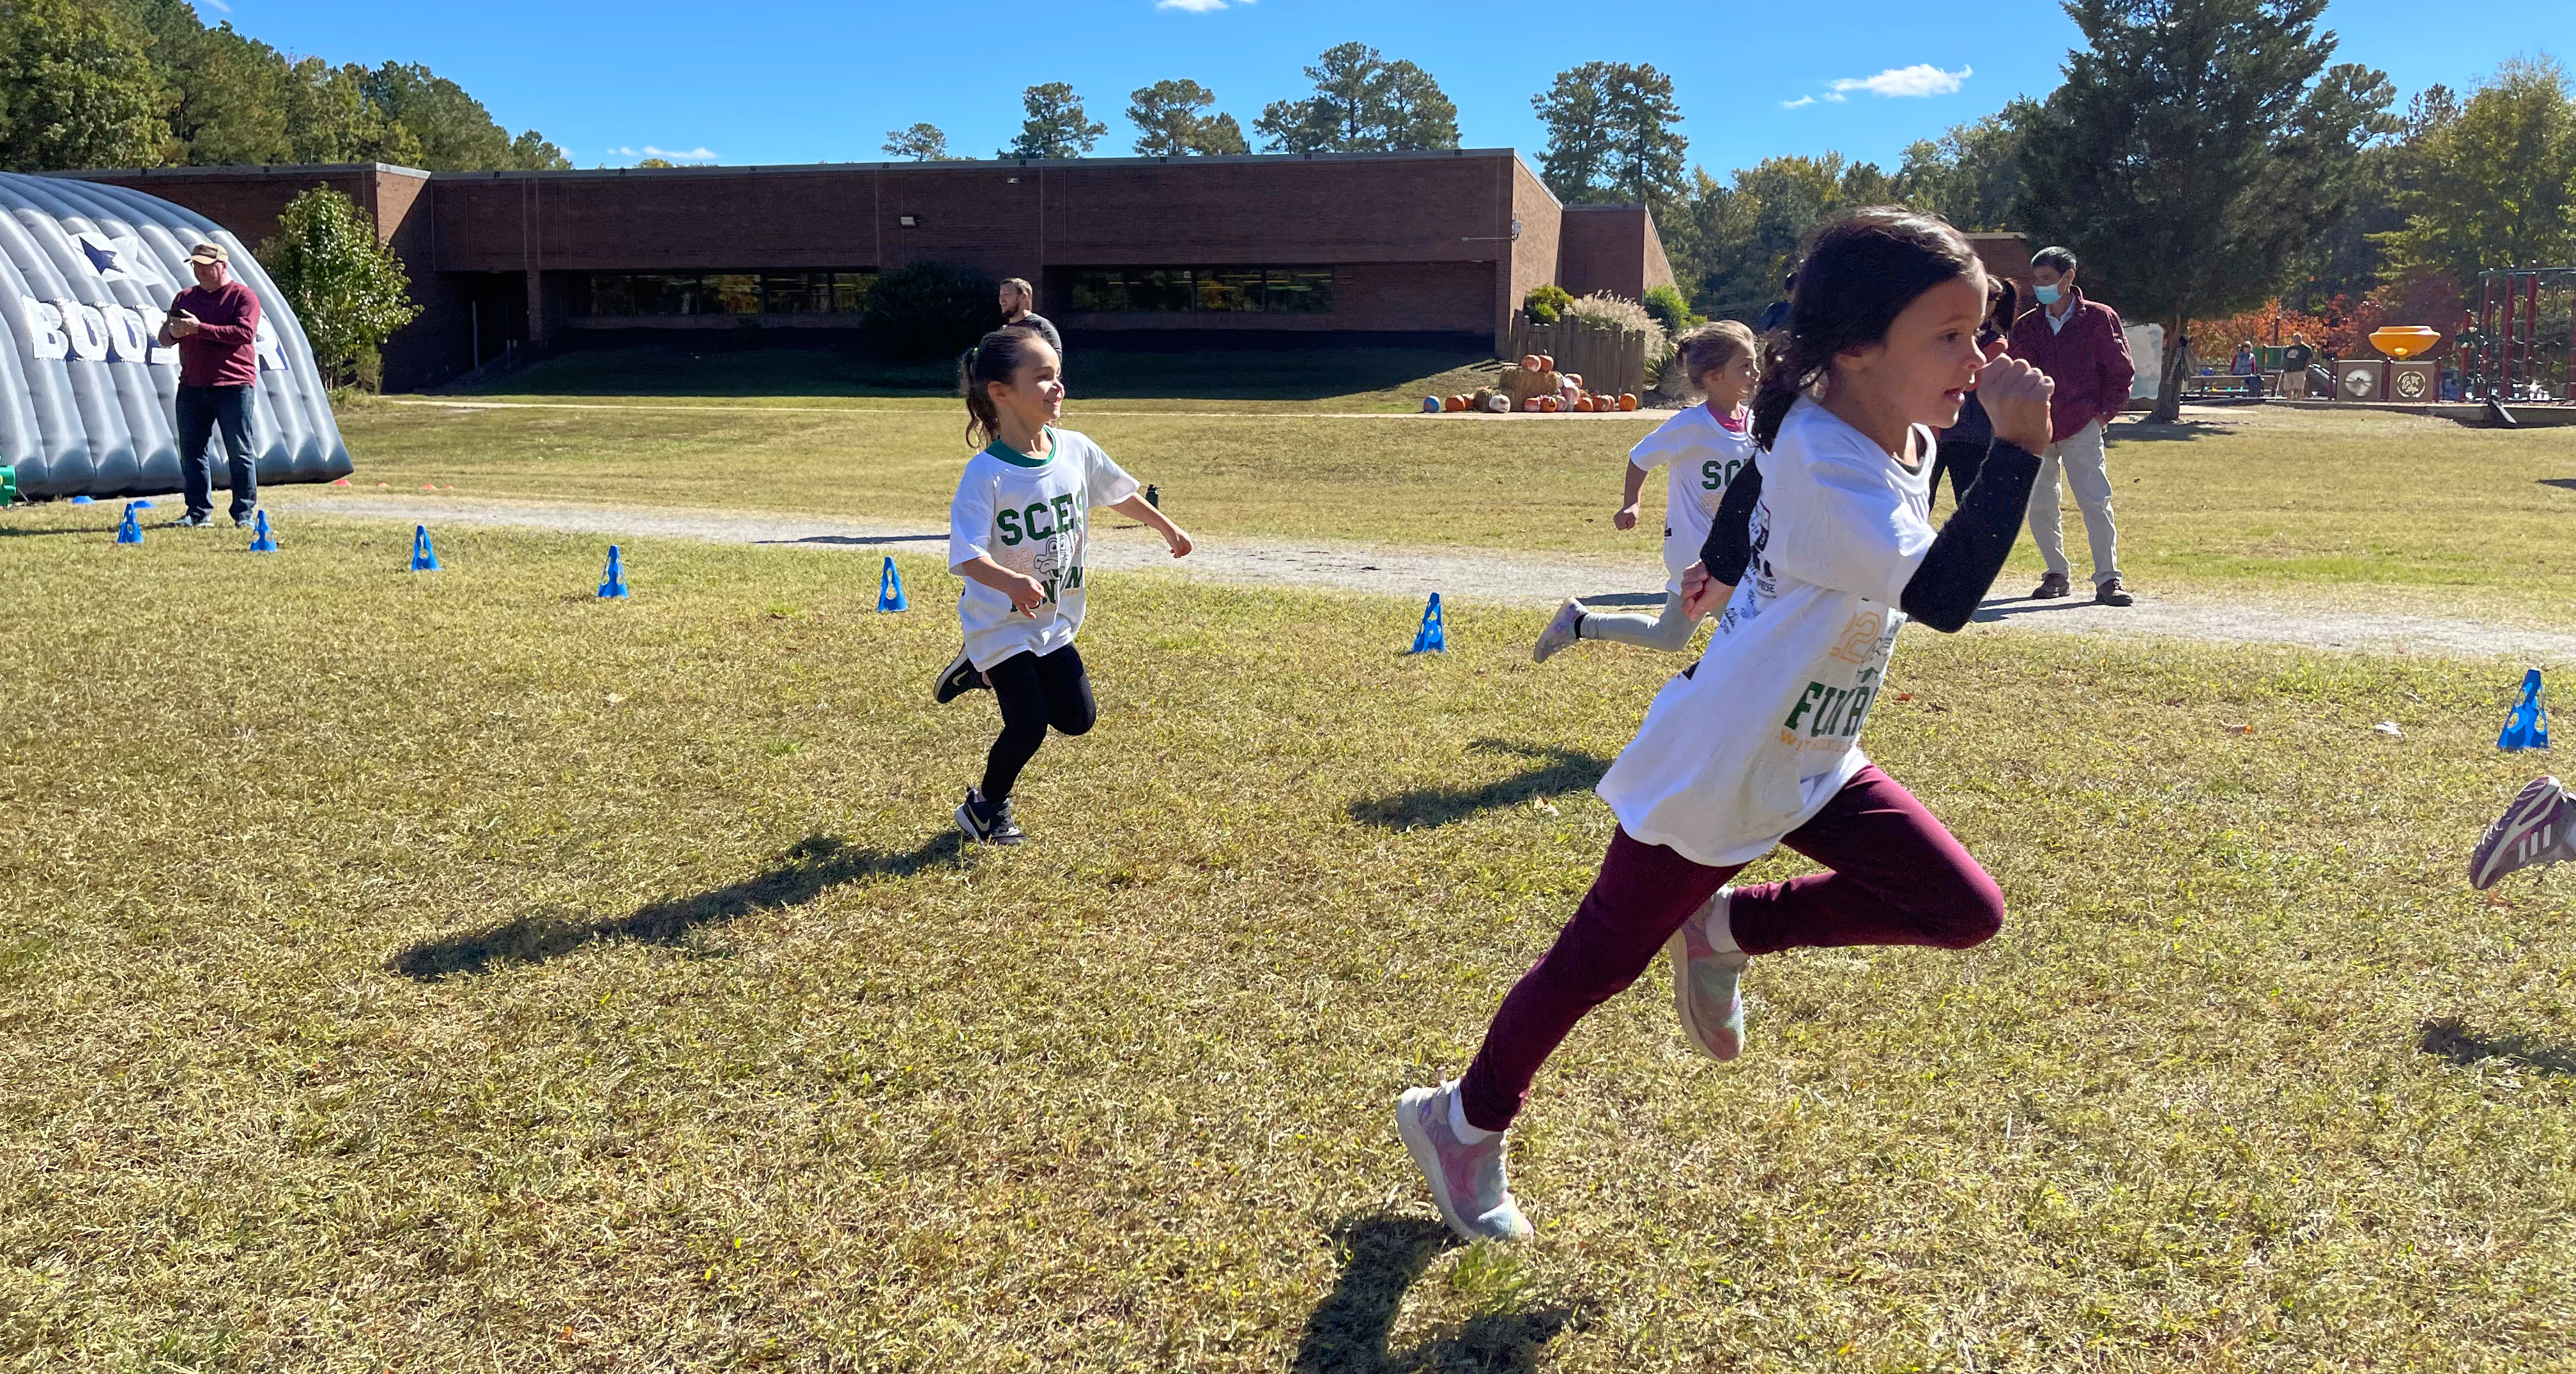 Three students racing outside on the field